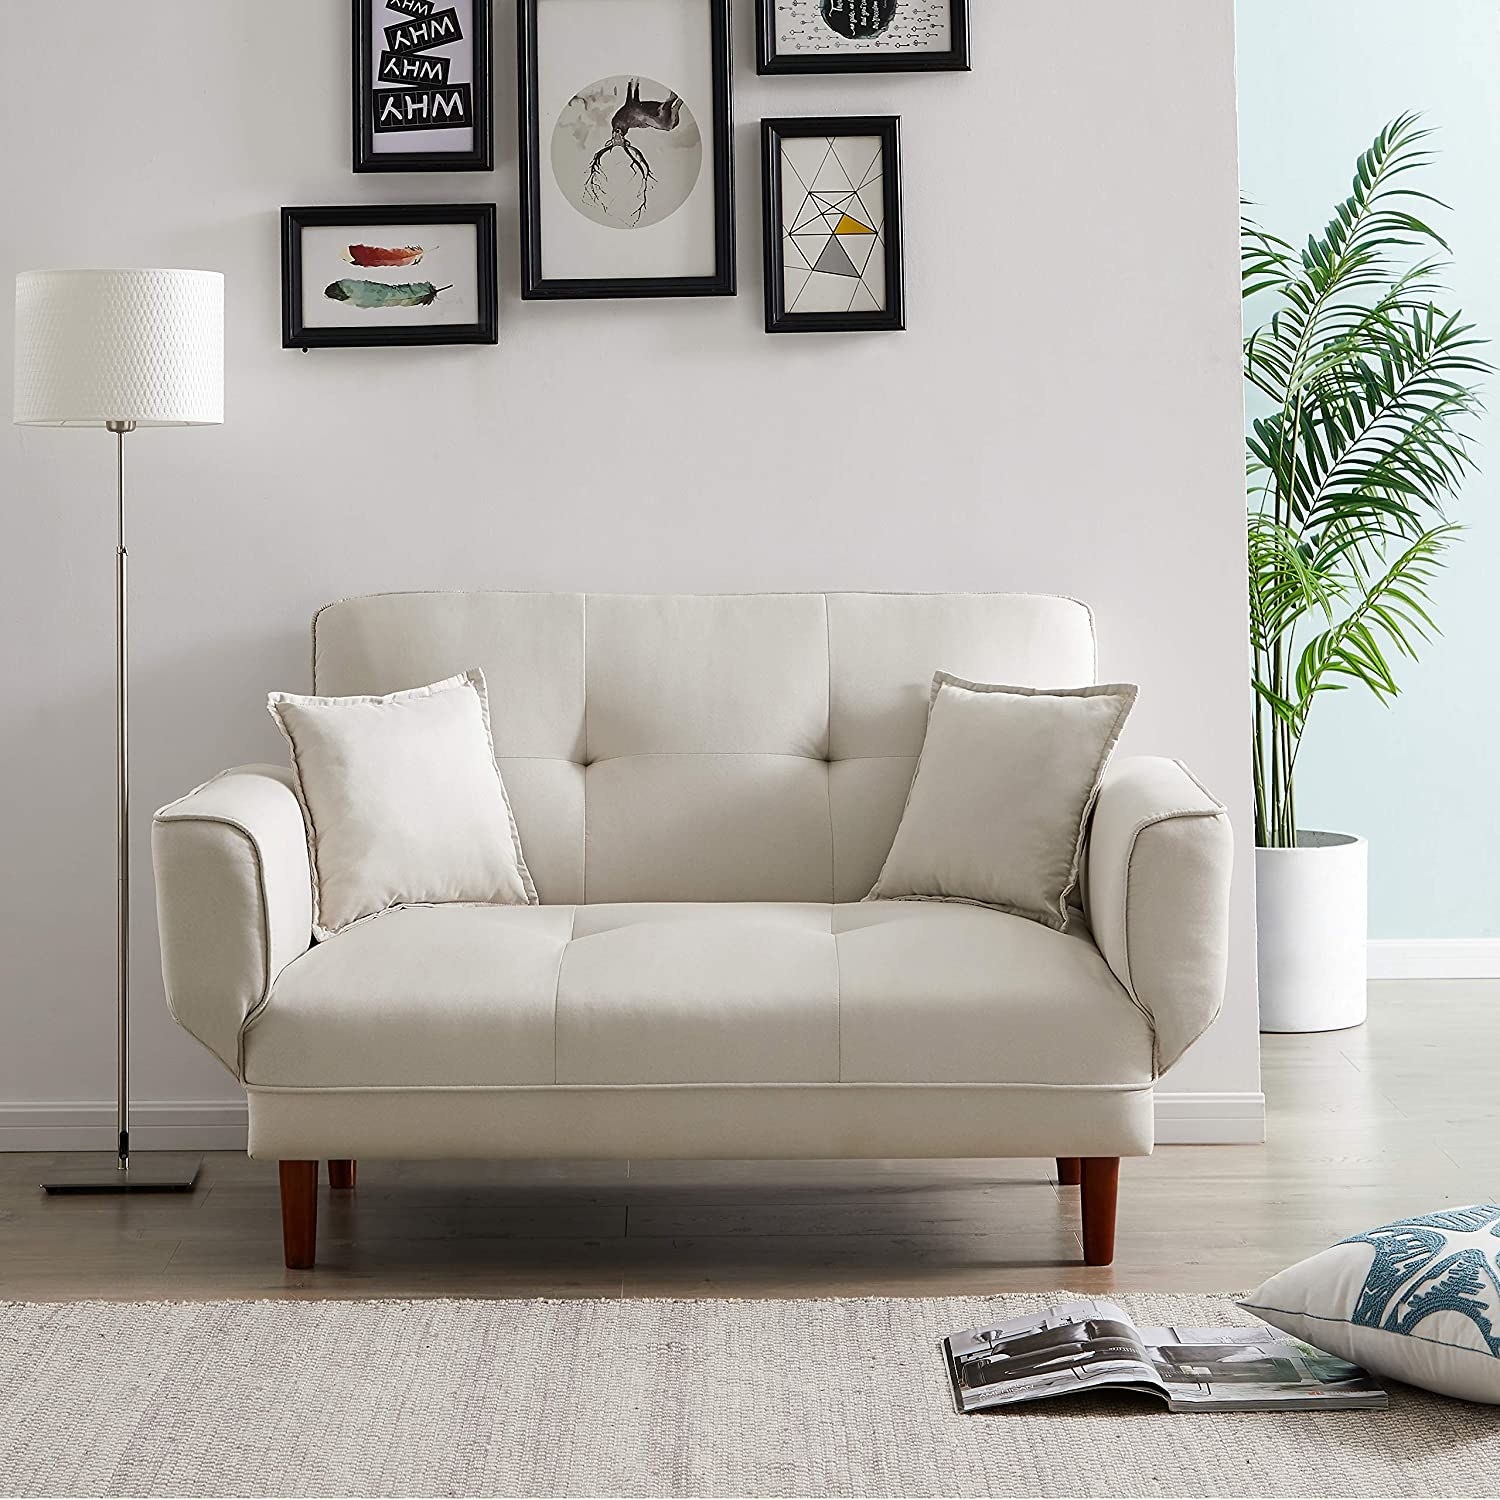 A white loveseat in a white room